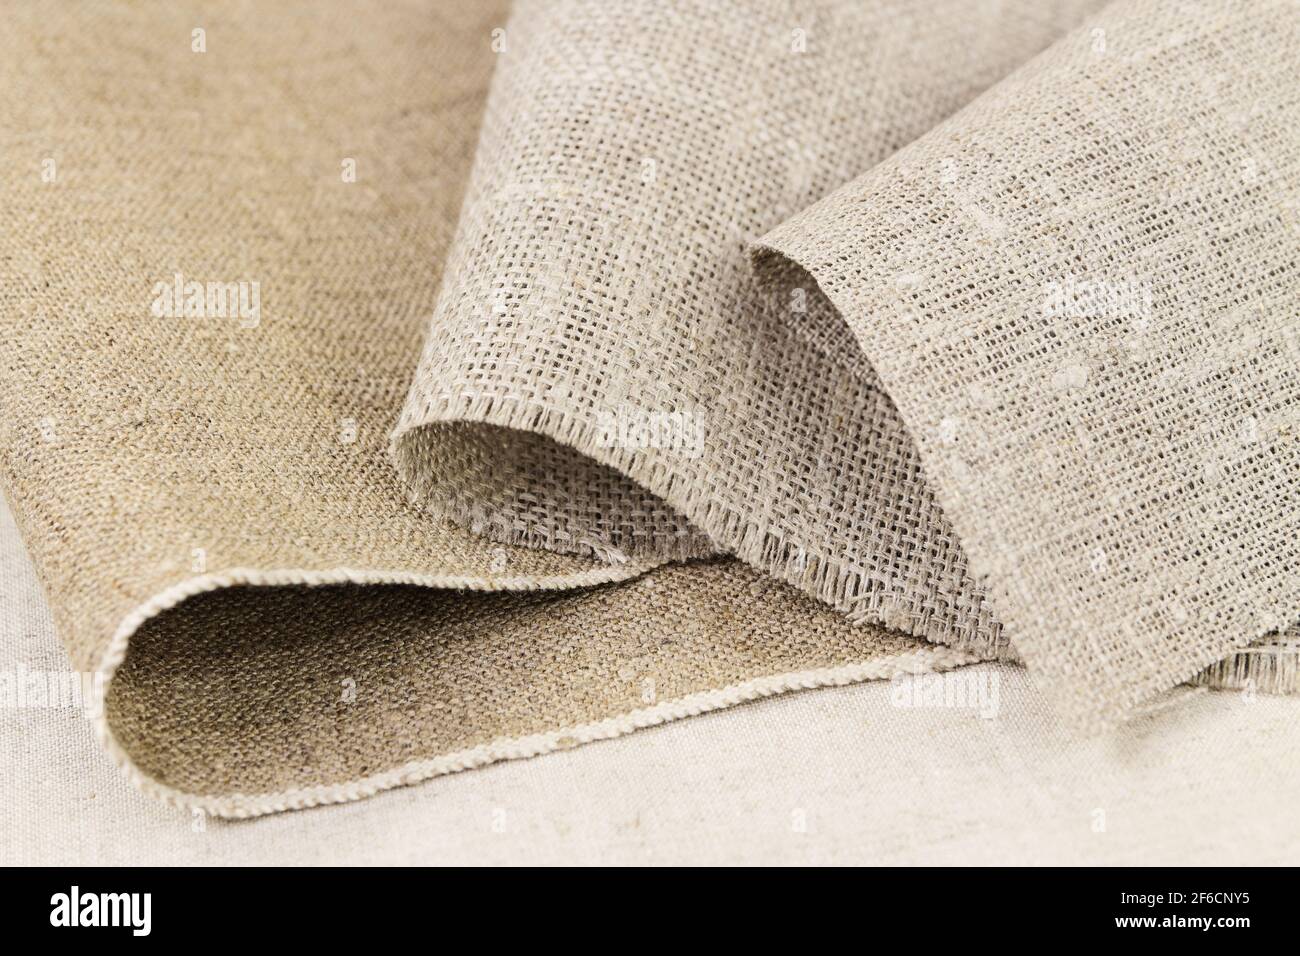 Folds of rough unbleached fabric cotton and flax Stock Photo